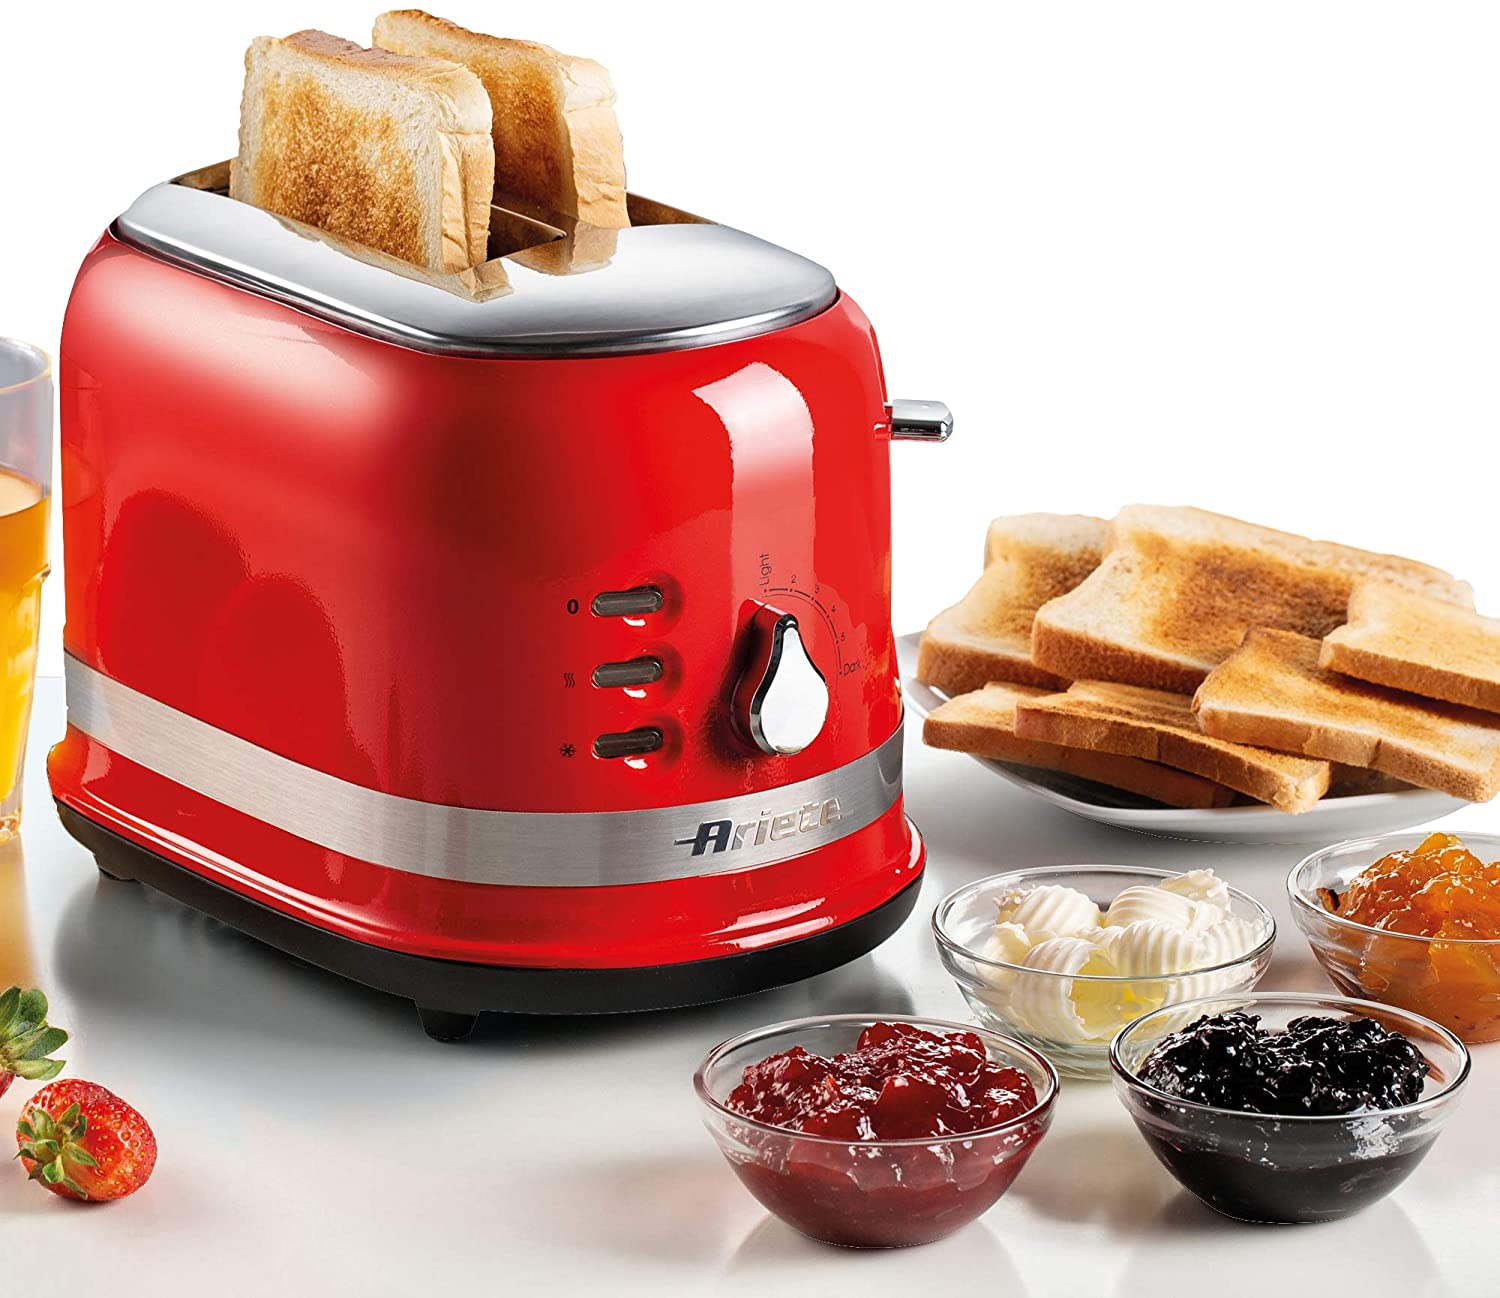 Bialetti Moderna Toaster Silver One Size